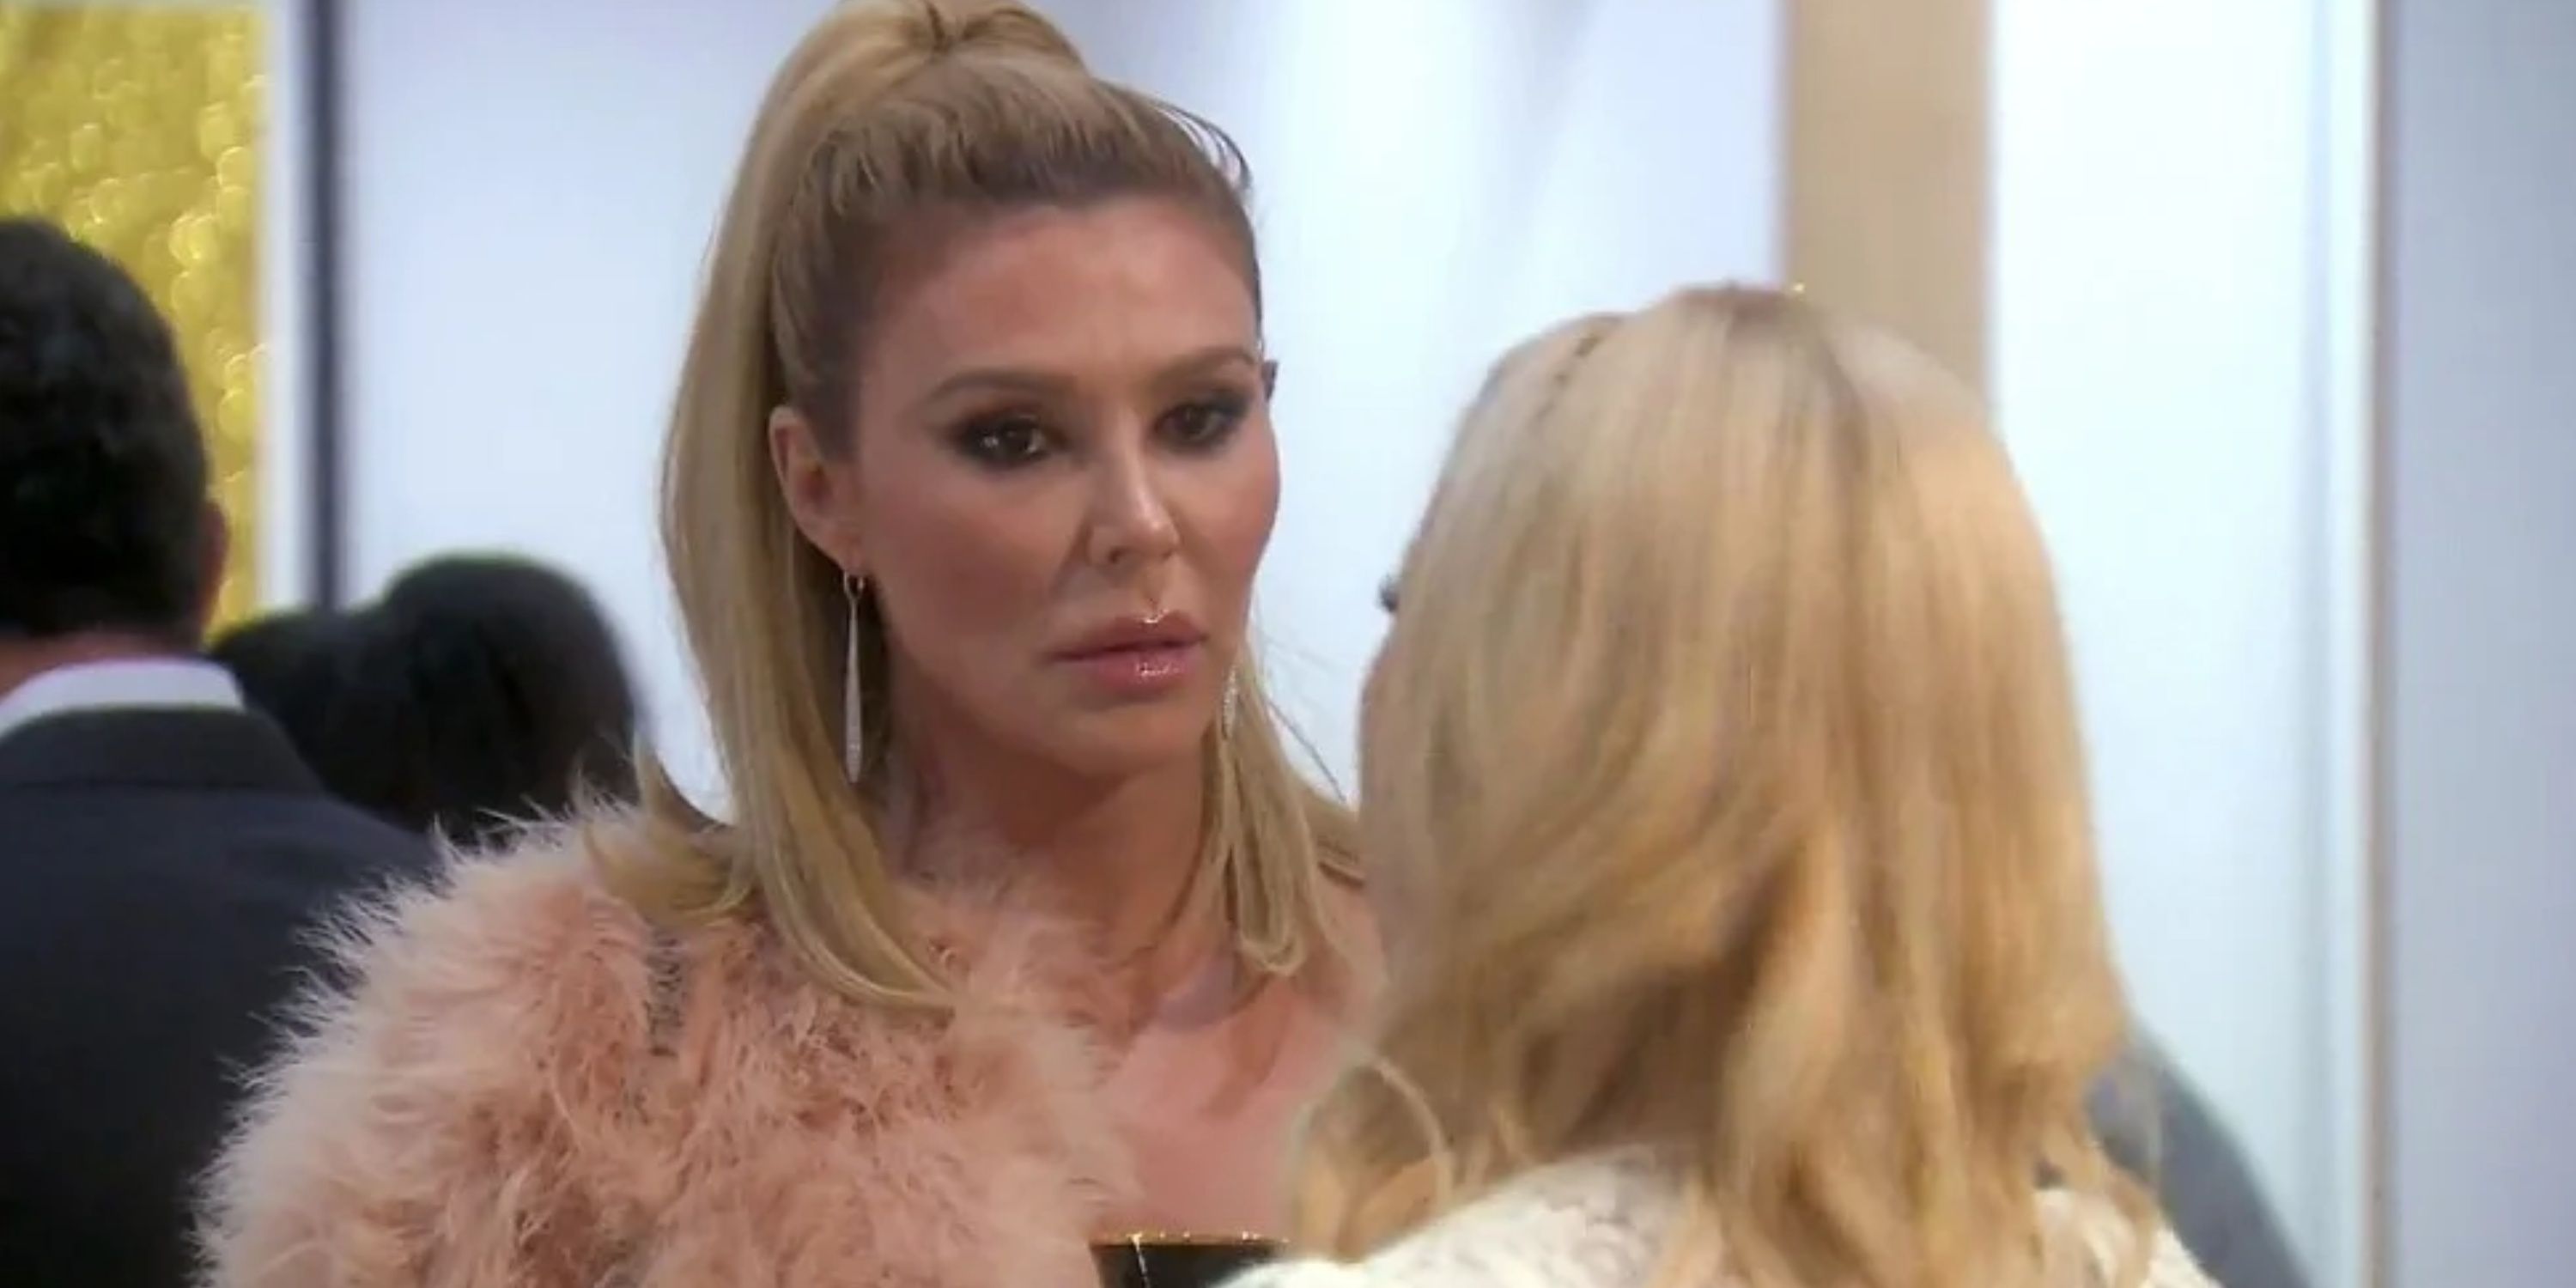 Brandi Glanville on Real Housewives of BH